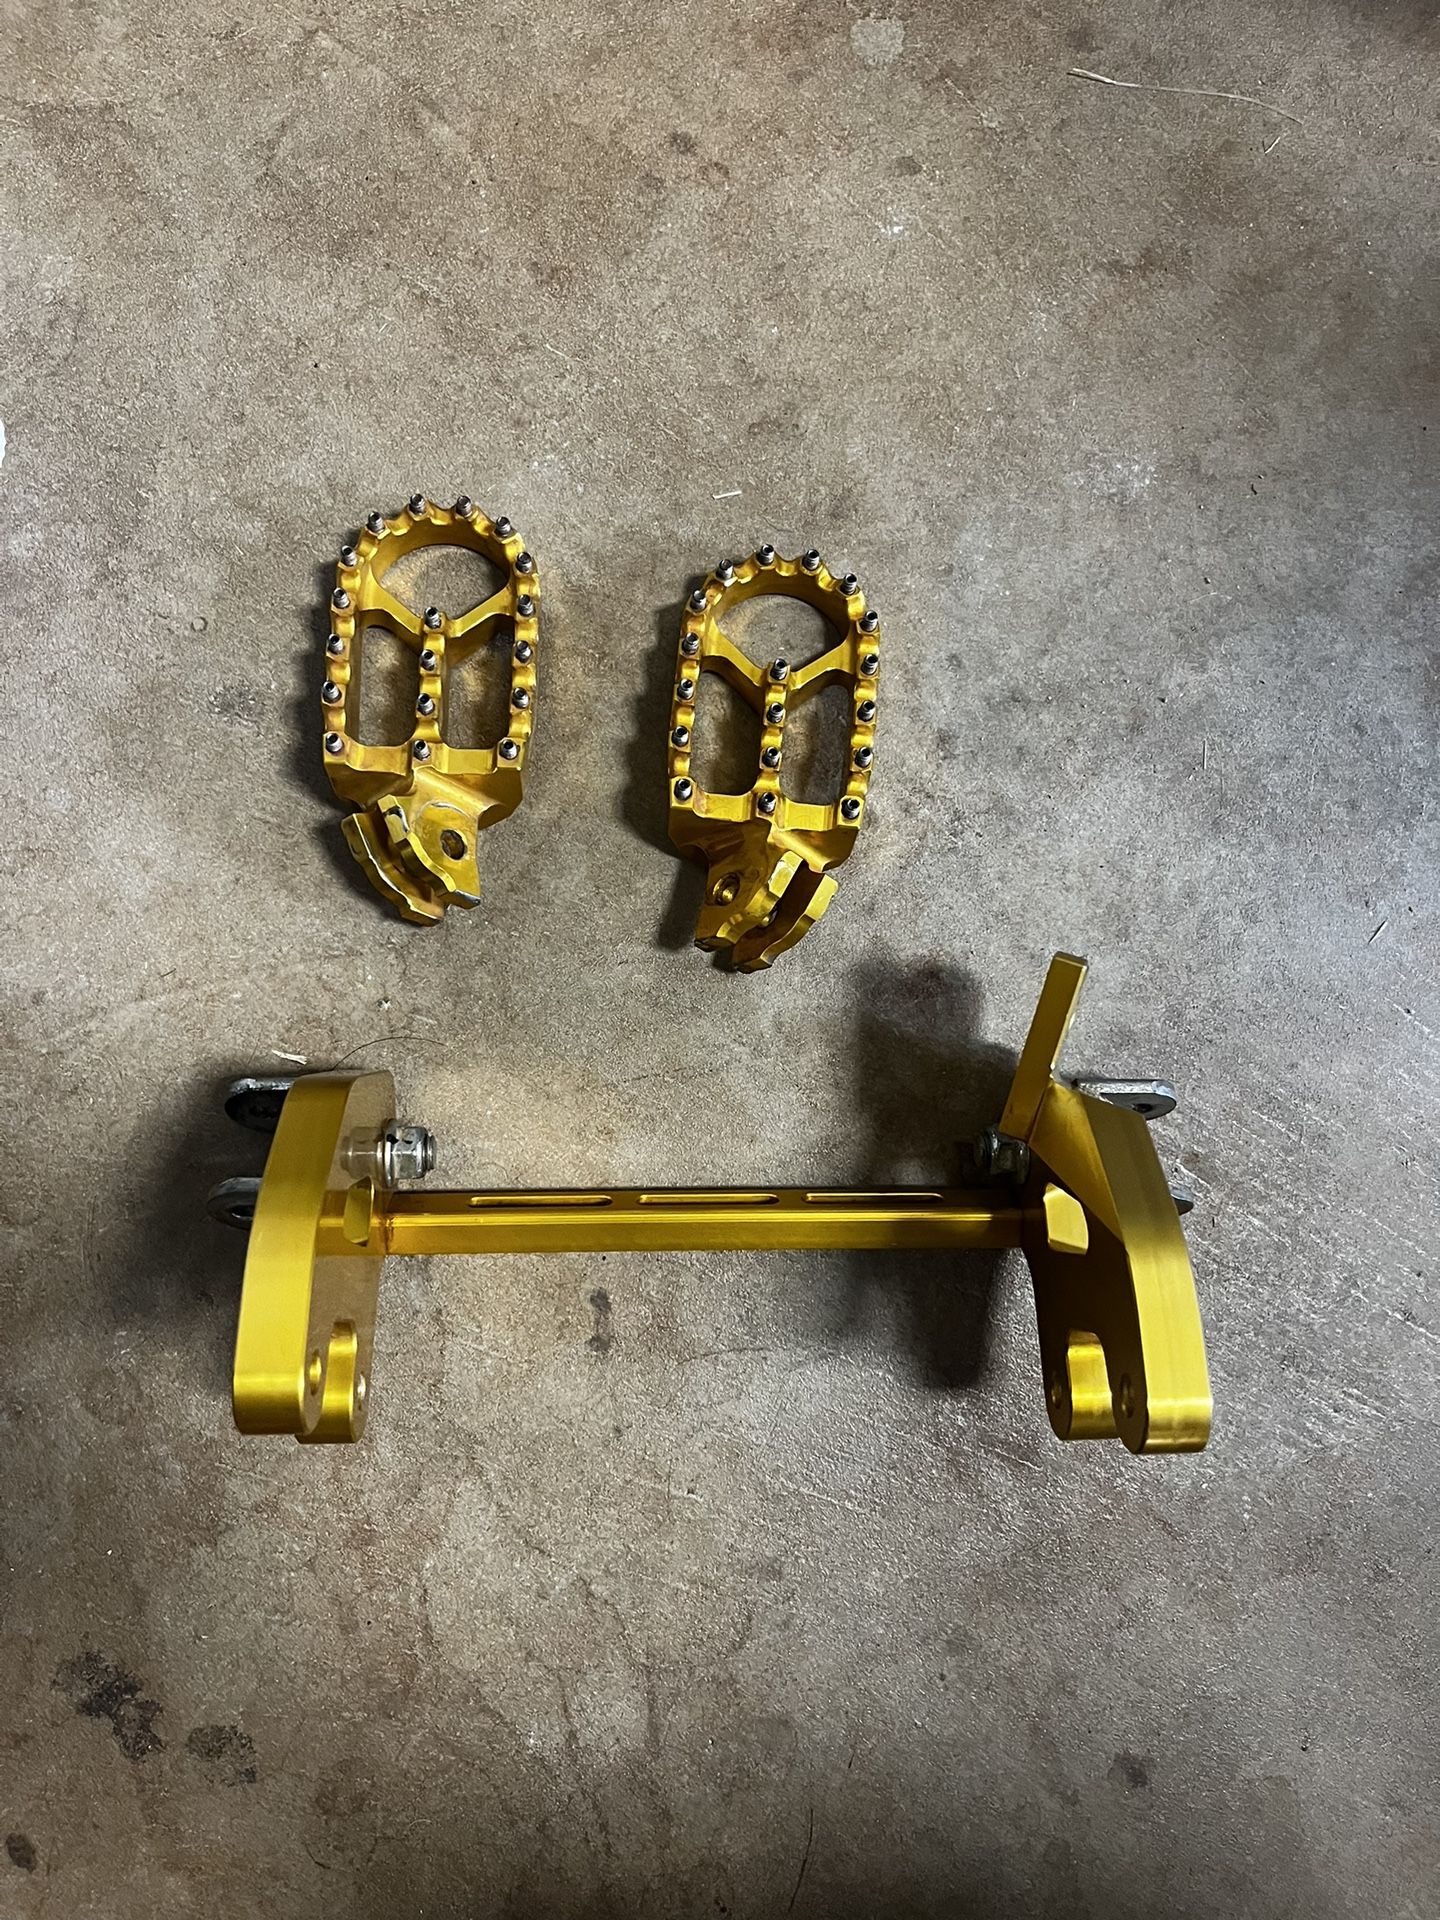 Gold Upgraded Peg Brace And Pegs 